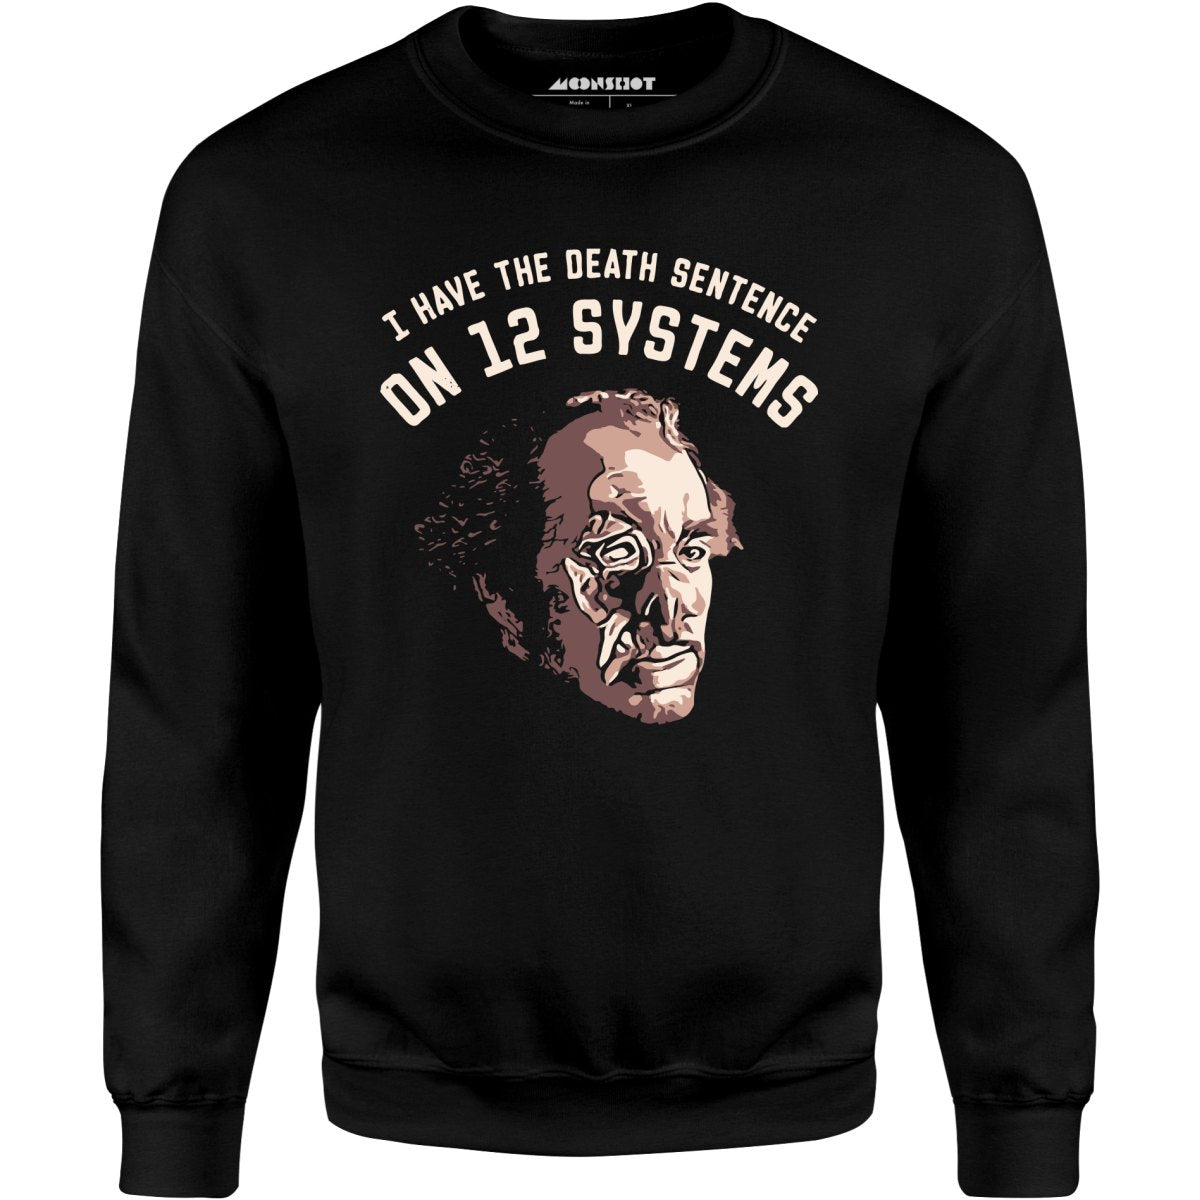 I Have the Death Sentence on 12 Systems - Unisex Sweatshirt